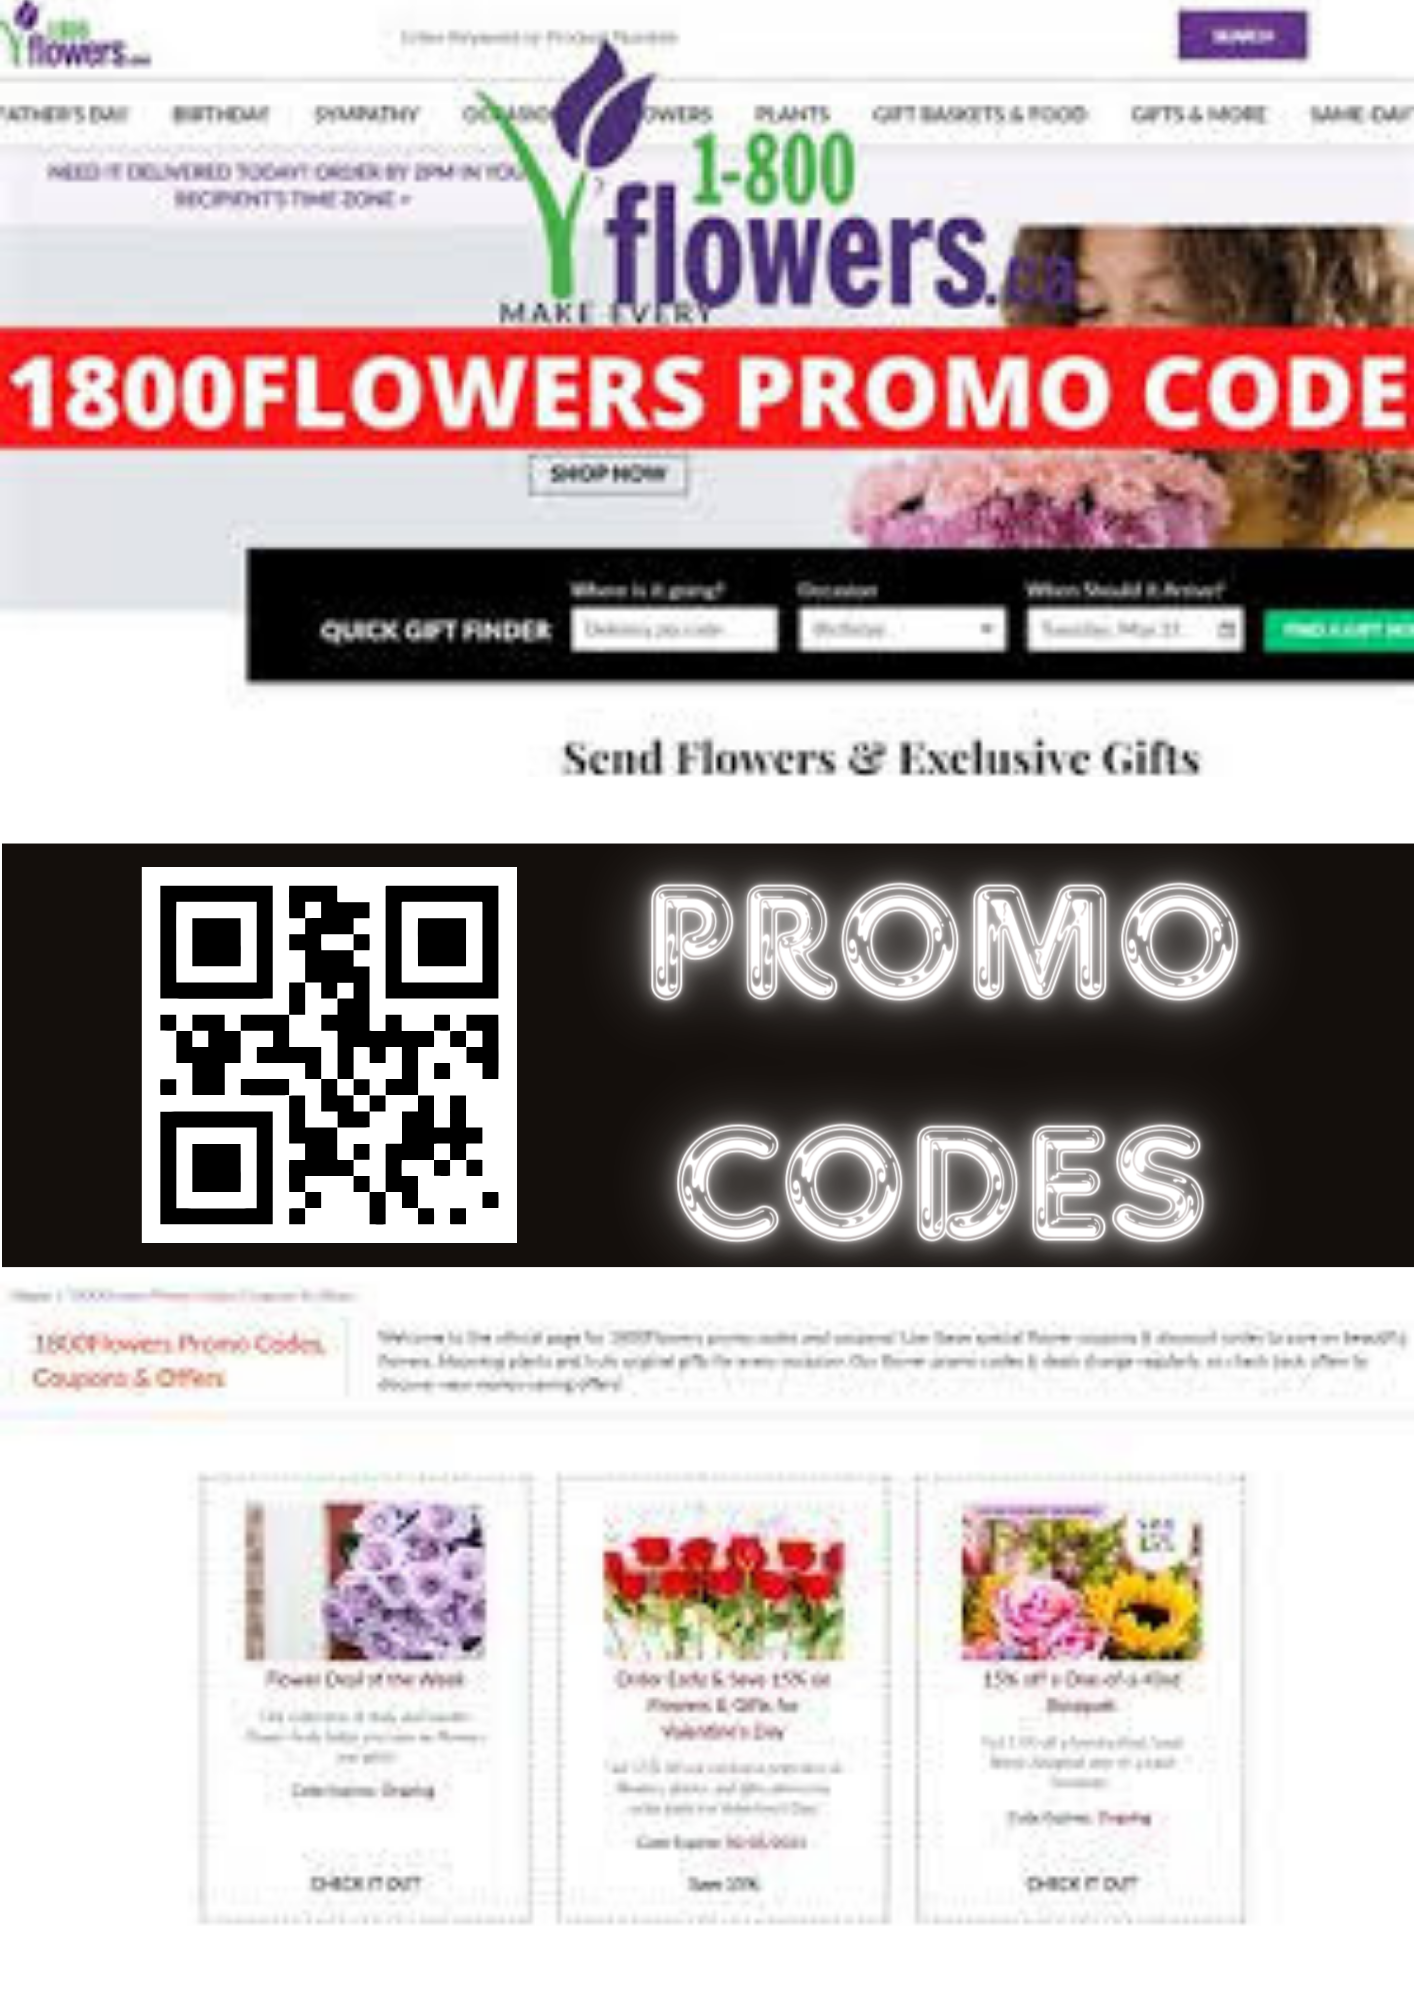 How To Save Money And Get Benefits With 1800Flowers Coupons